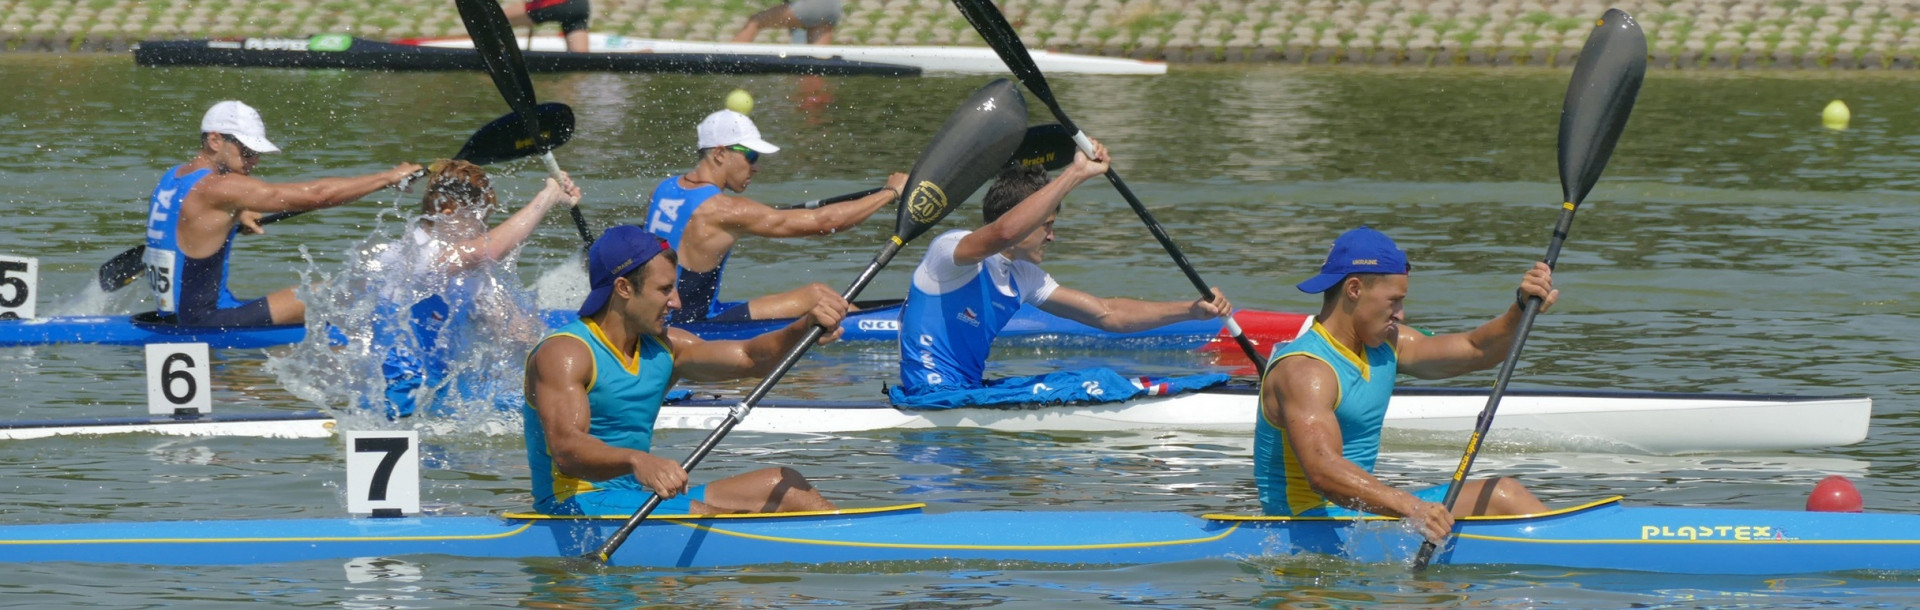 Plovdiv to host 2018 ICF Under-23 and Junior Canoe Sprint World Championships